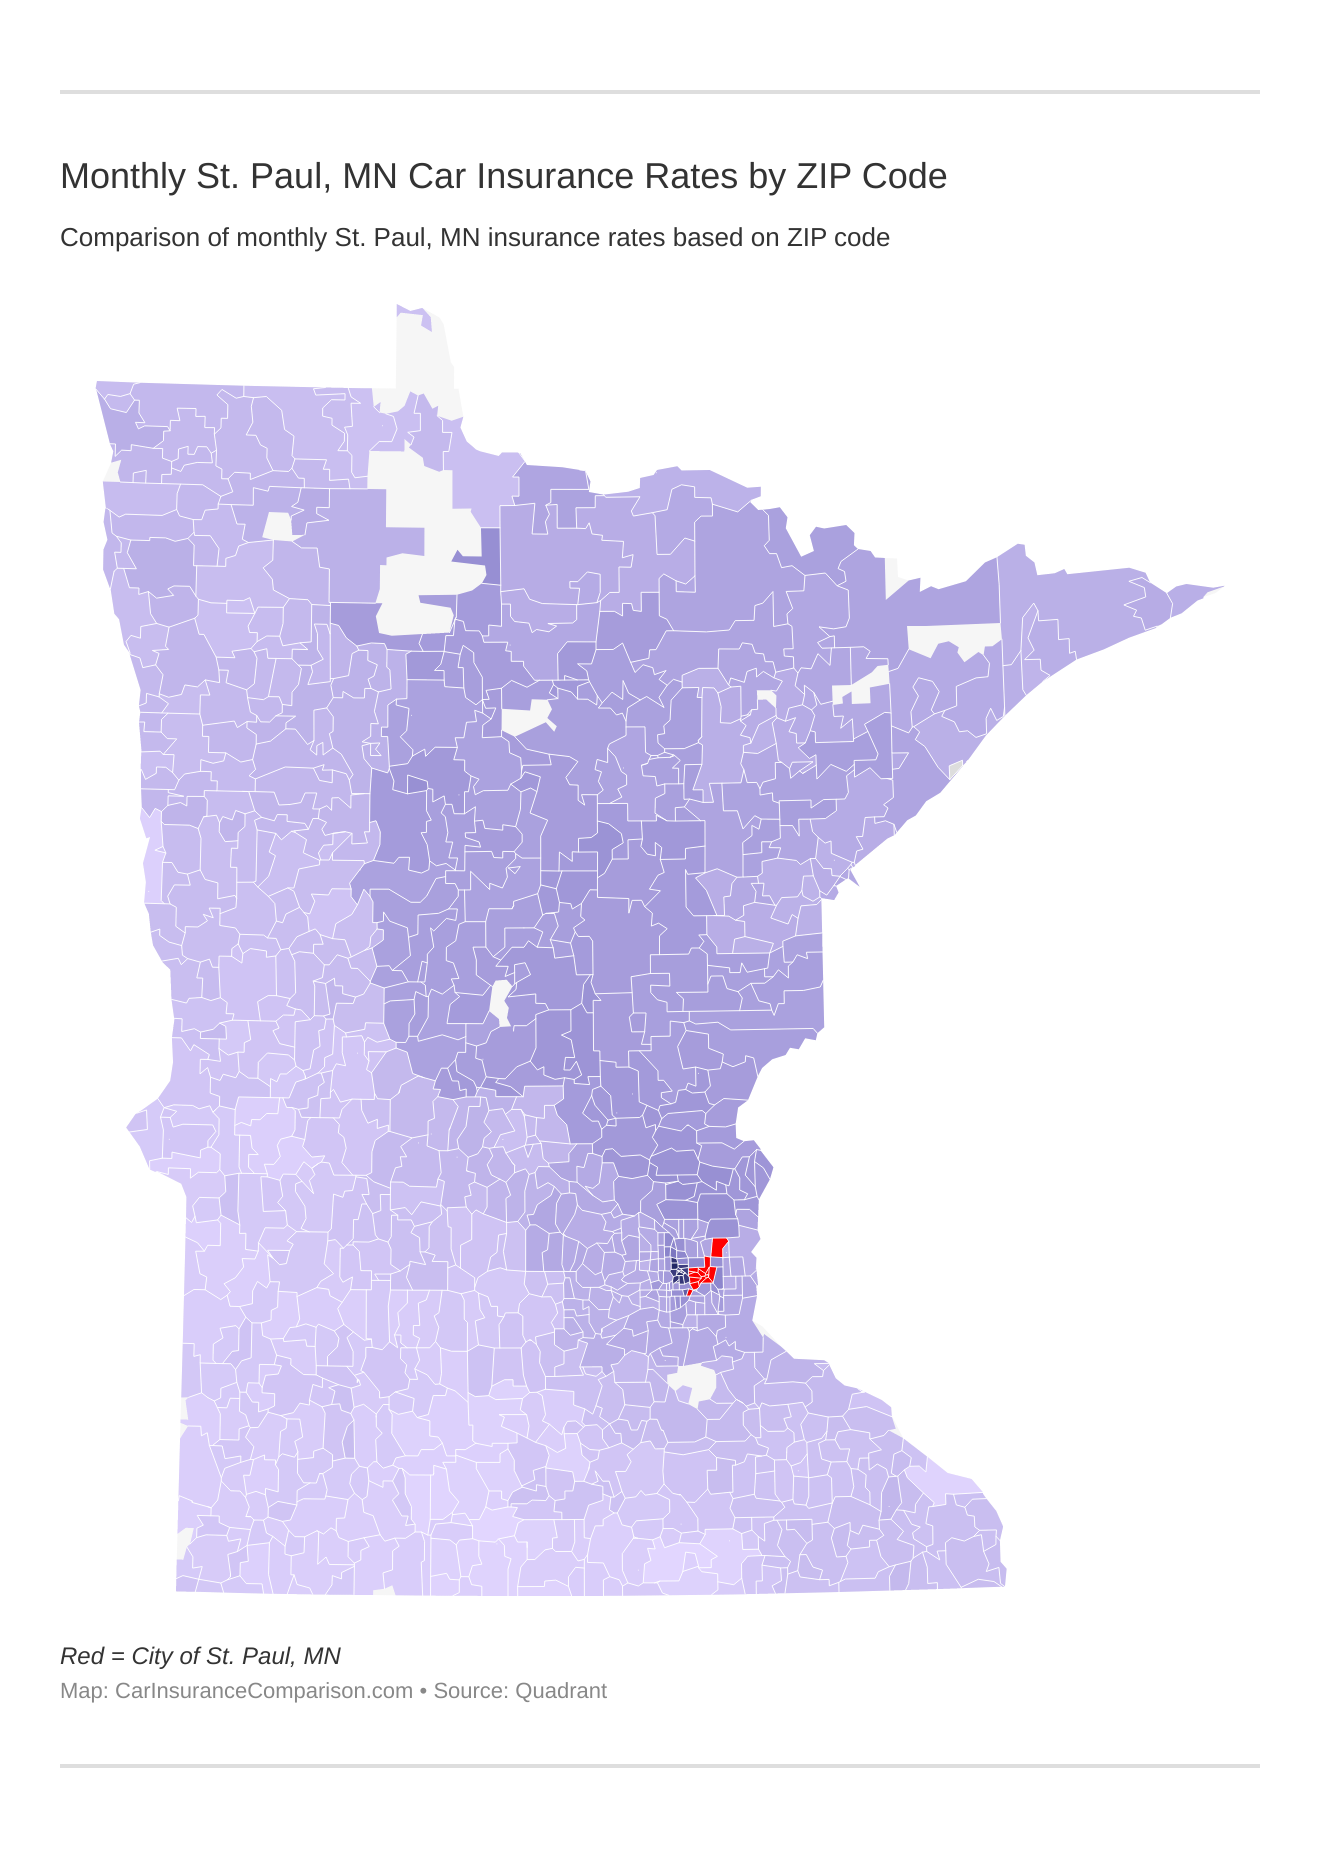 Monthly St. Paul, MN Car Insurance Rates by ZIP Code